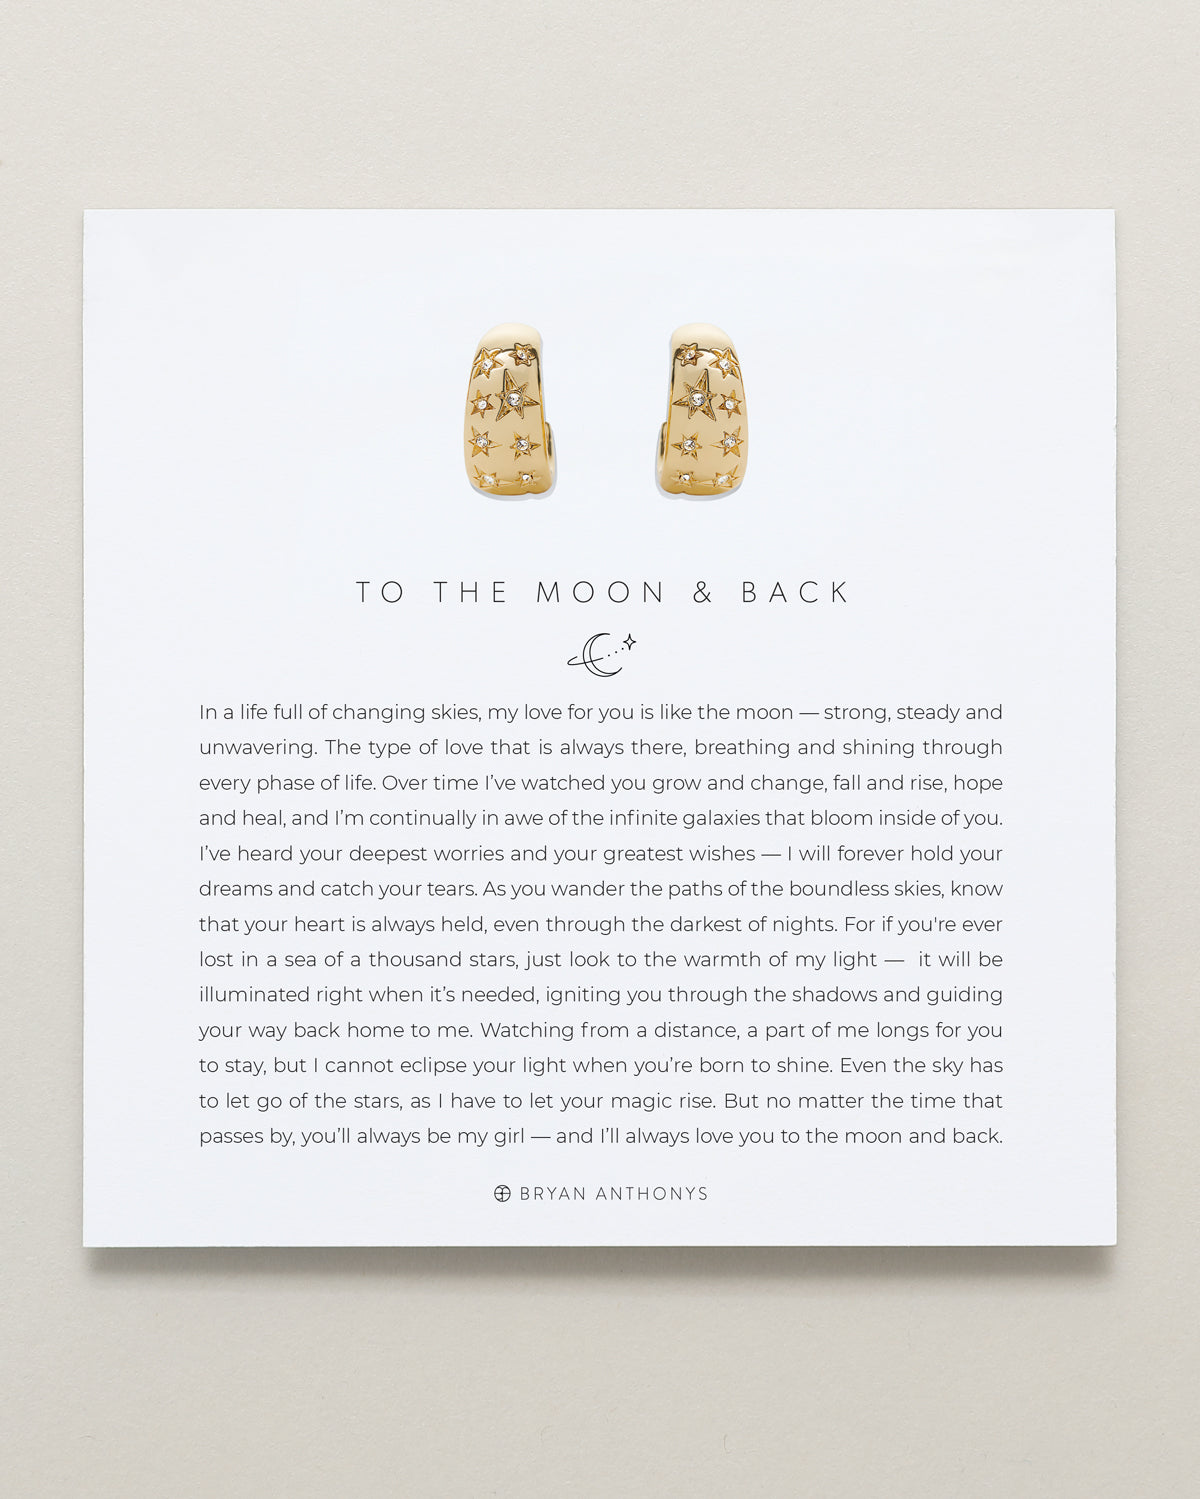 Bryan Anthonys To The Moon And Back Gold Hoop Earrings On Card